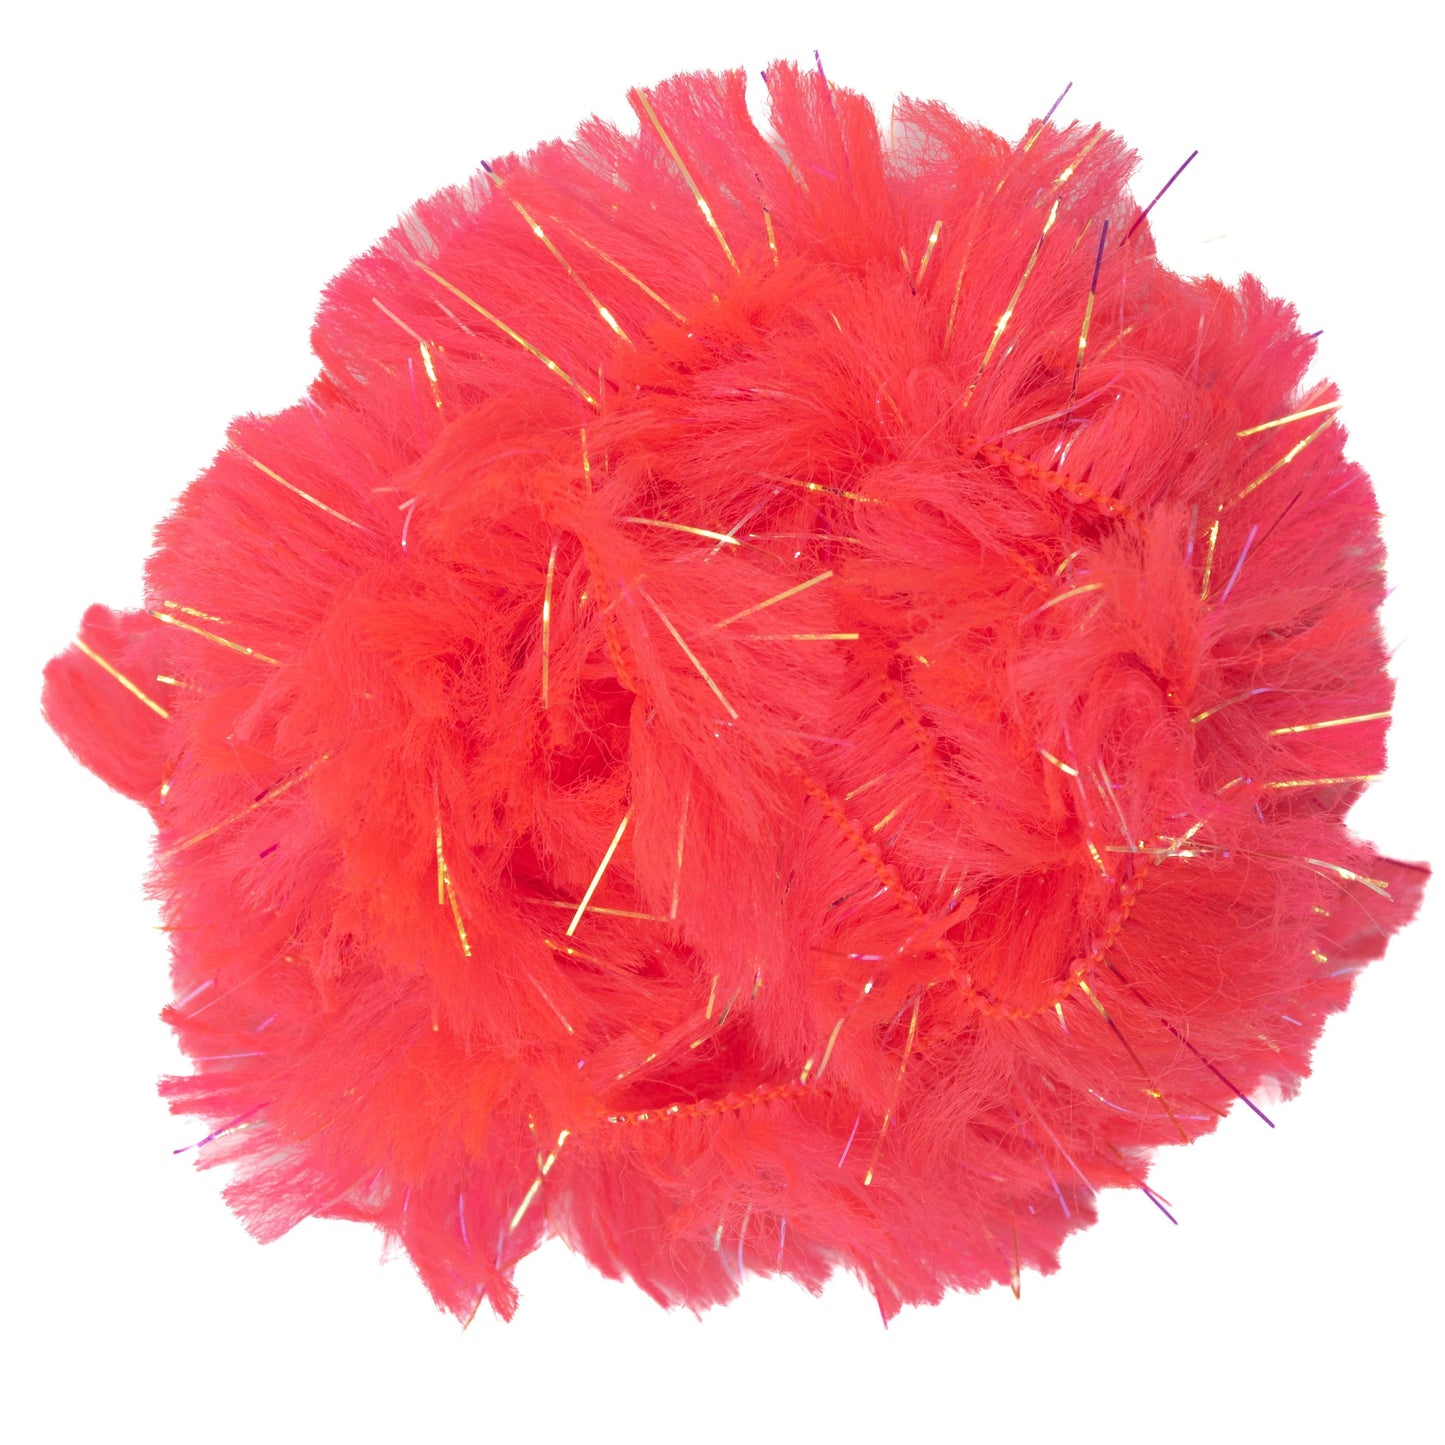 Synthetic Body Fur in Hot Pink